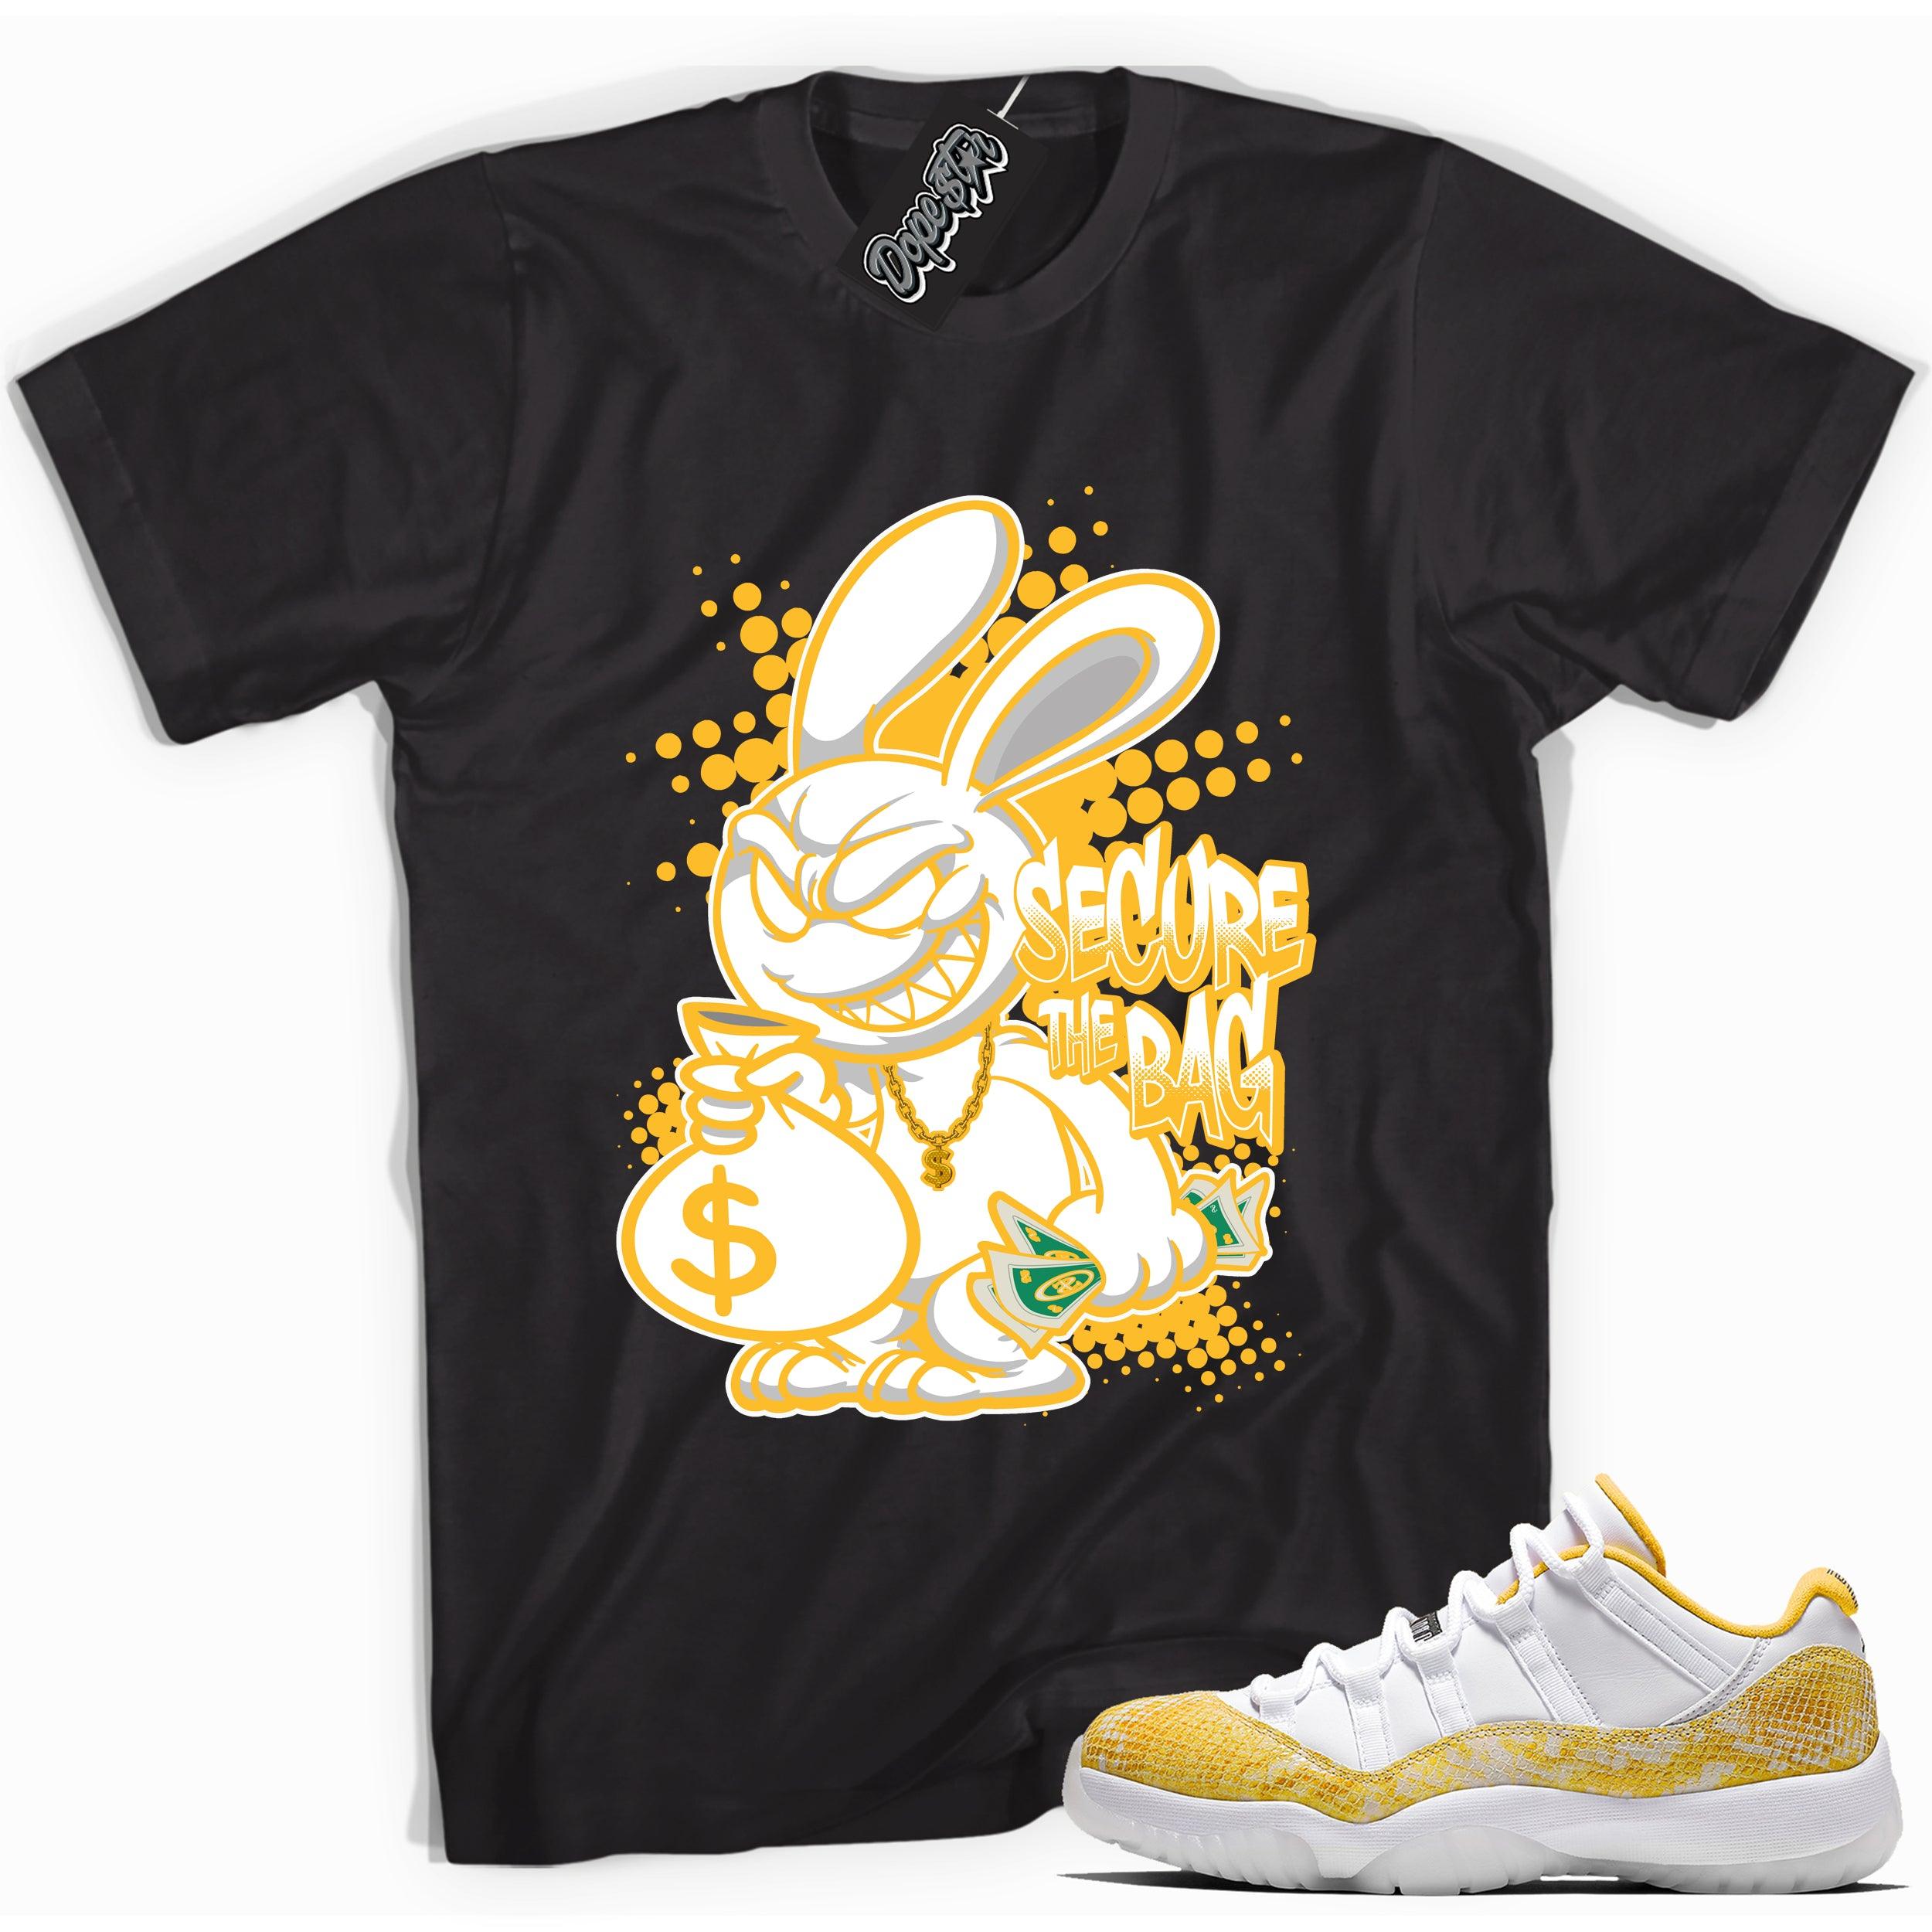 Cool black graphic tee with 'secure the bag' print, that perfectly matches  Air Jordan 11 Retro Low Yellow Snakeskin sneakers